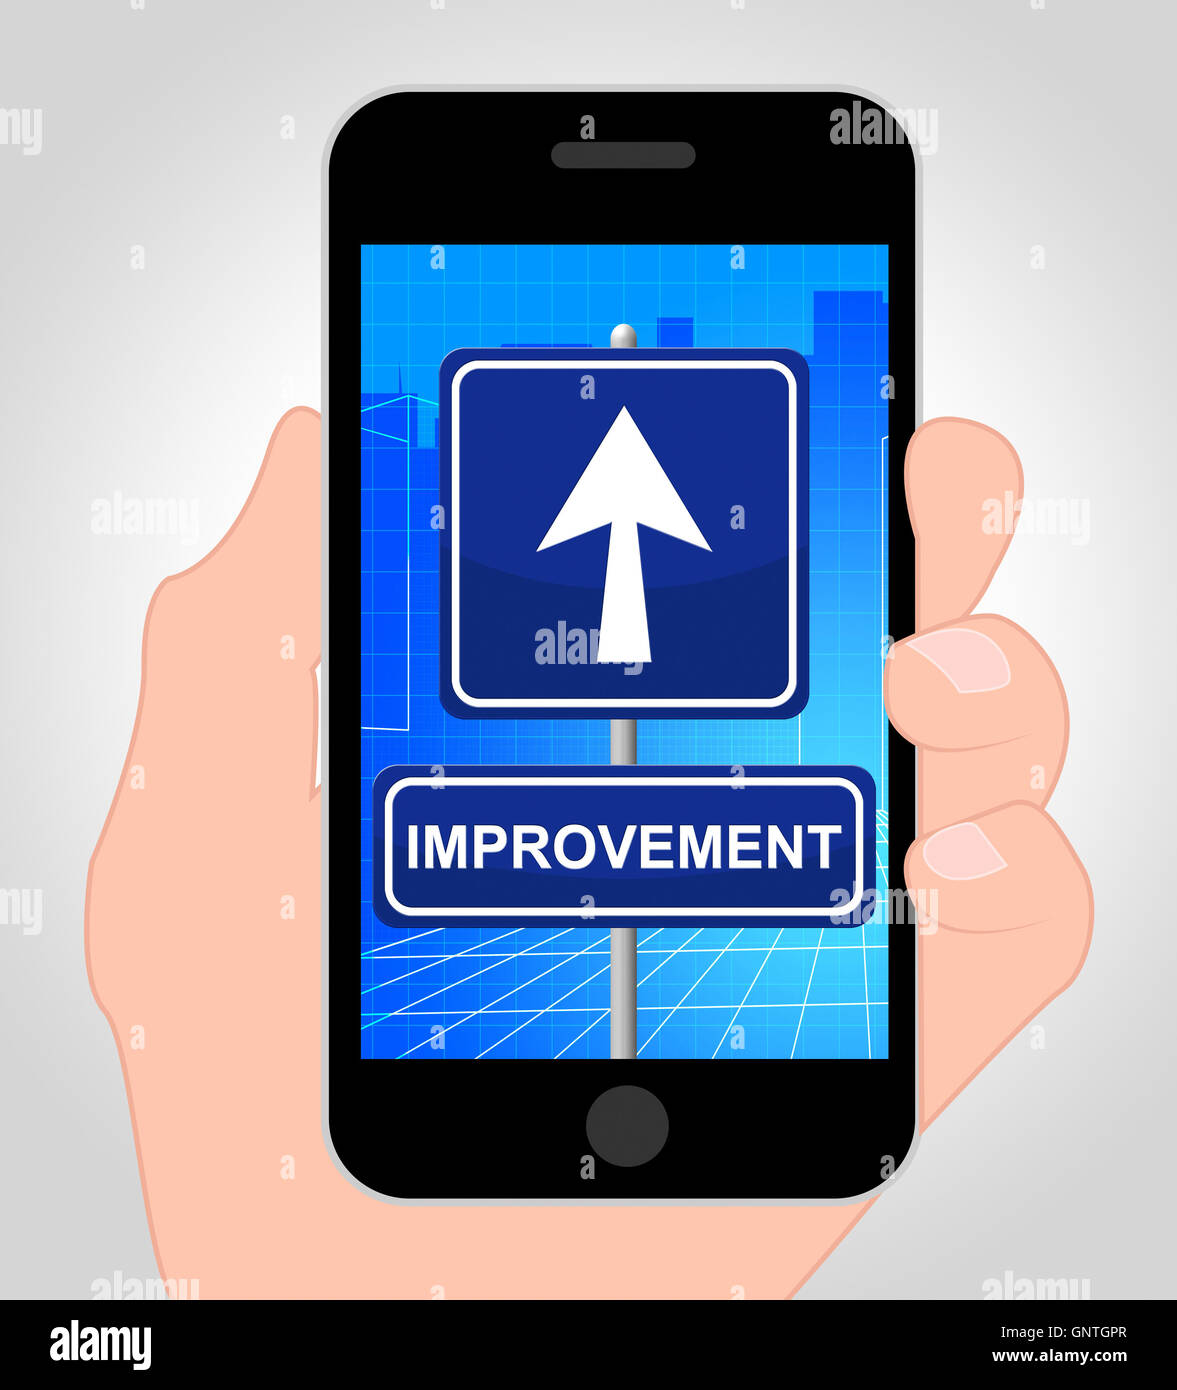 Improvement Online Showing Evolve And Grow 3d Illustration Stock Photo